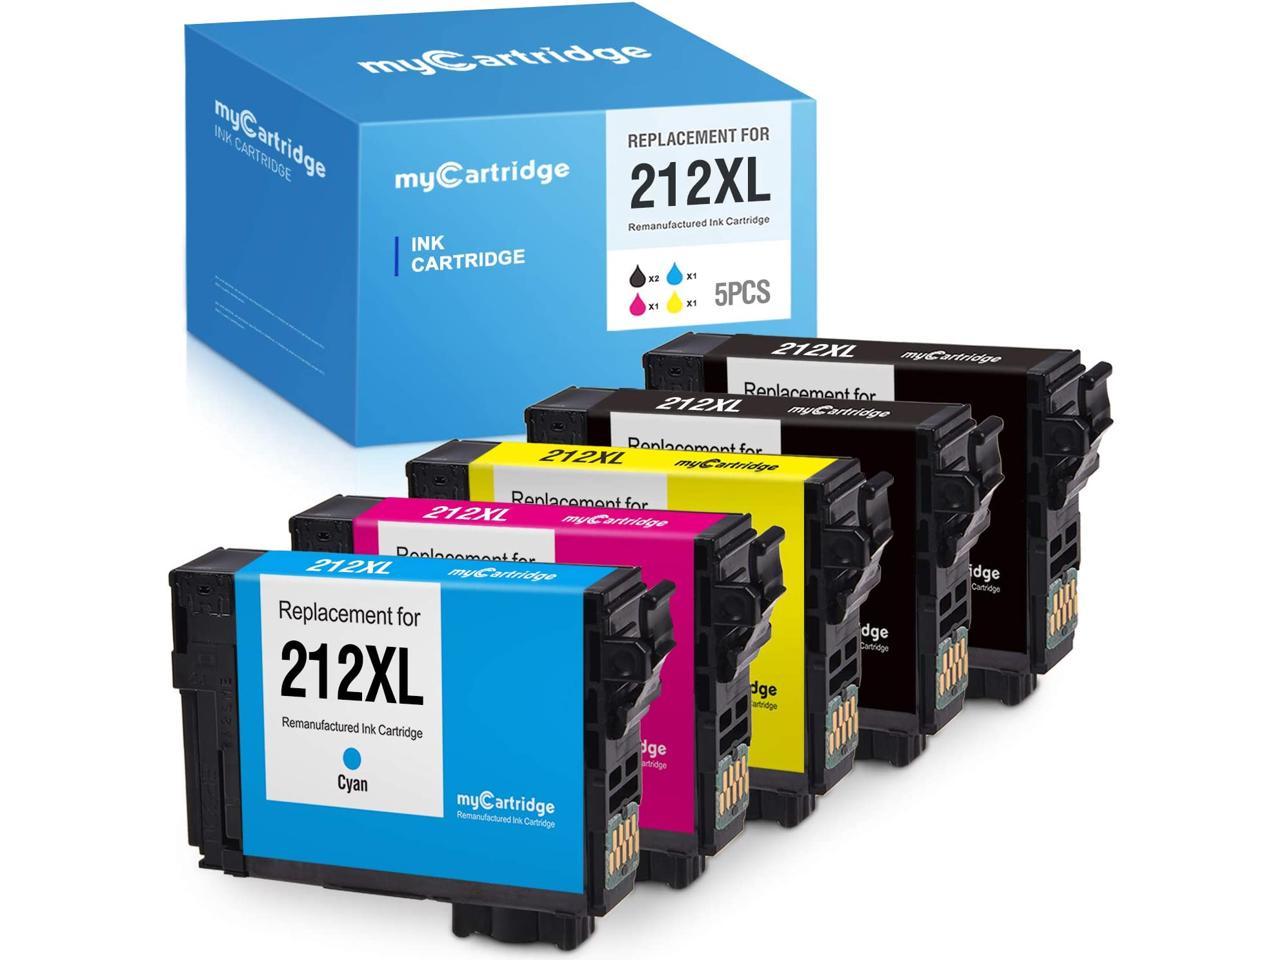 MYCARTRIDGE Ink Cartridge Replacement for Epson 212XL 212 to Use with